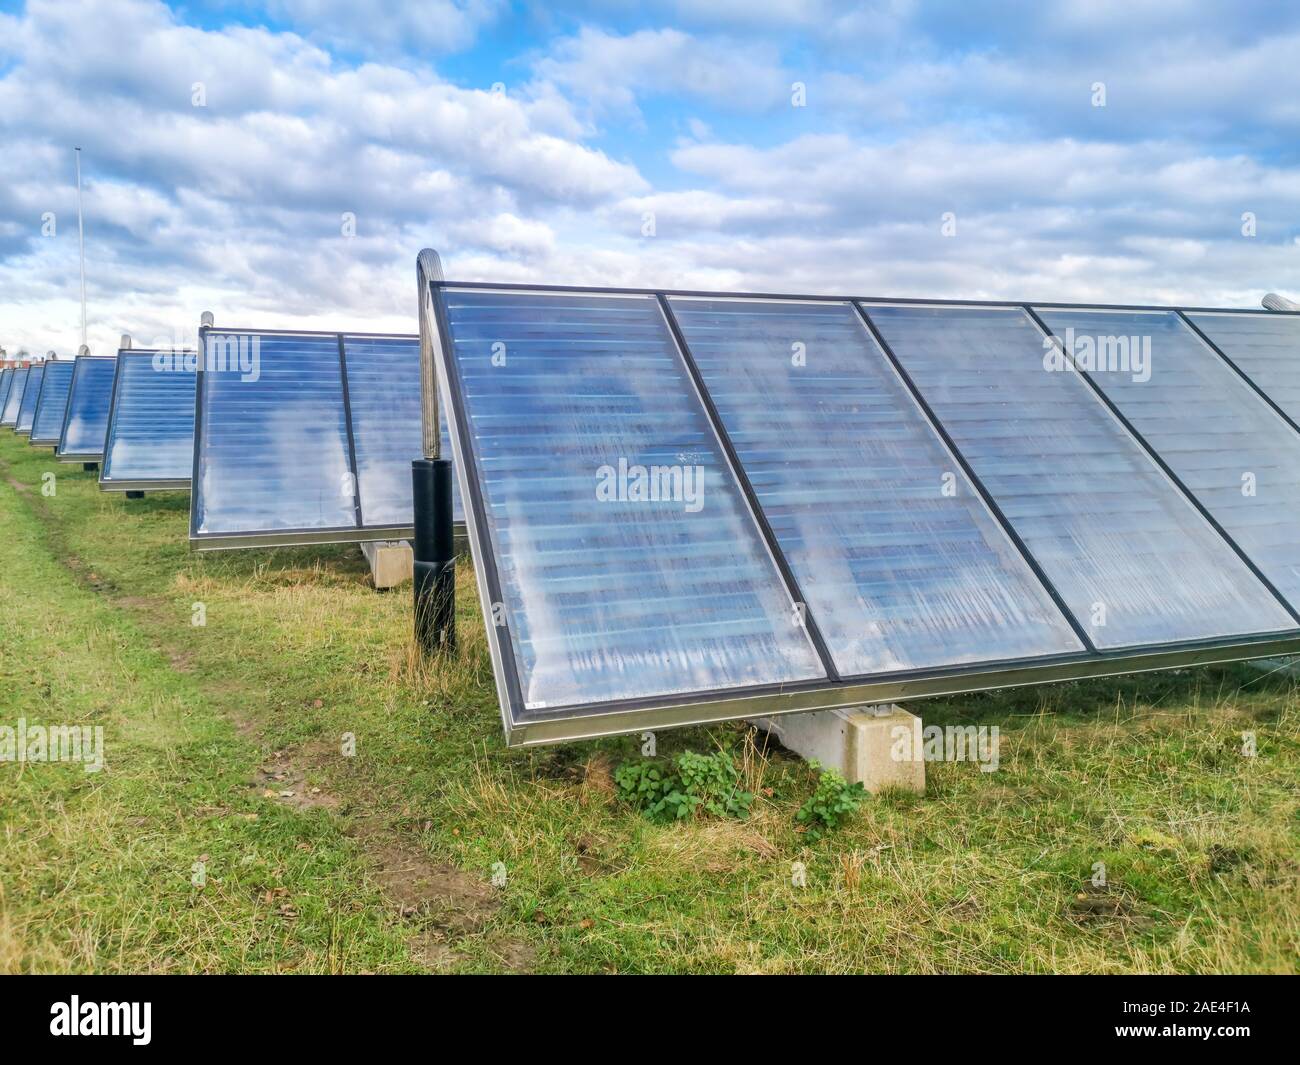 Field Photovoltaic solar production panels on a building roof Stock Photo